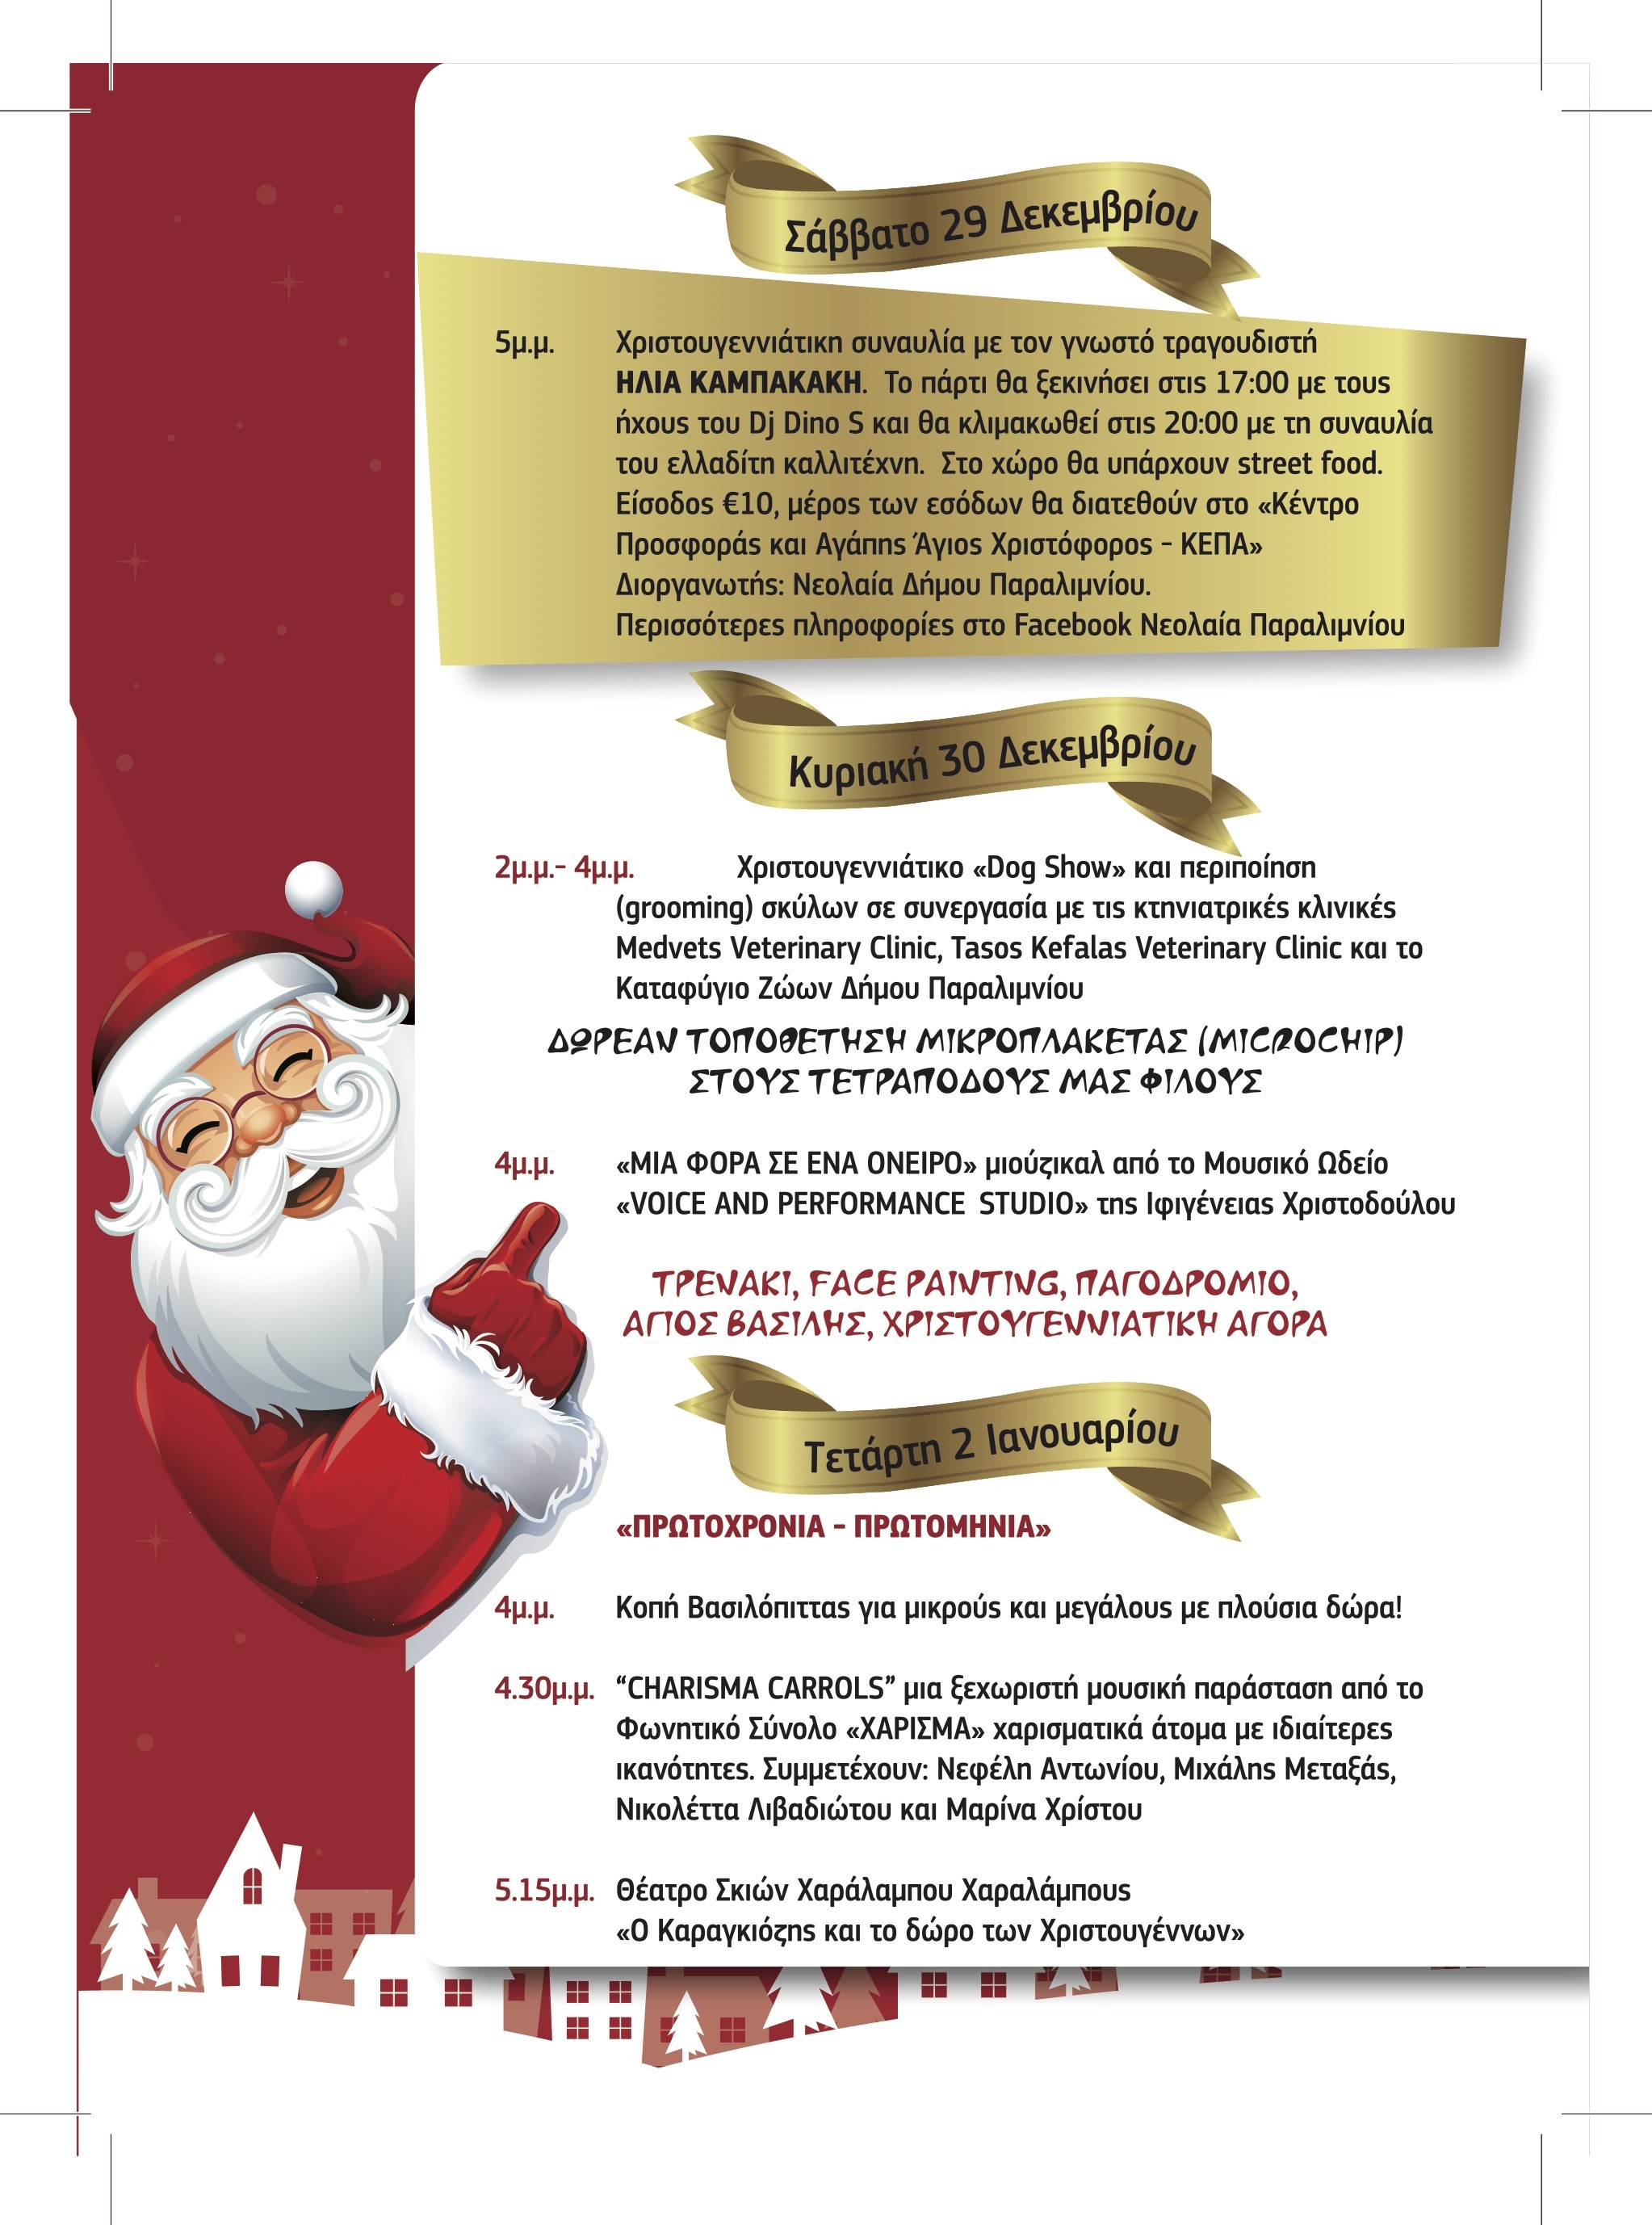 FINAL PROGRAM OF CHRISTMAS EVENTS PROGRAMME OF EVENTSdddd Ghost Town Christmas, Christmas